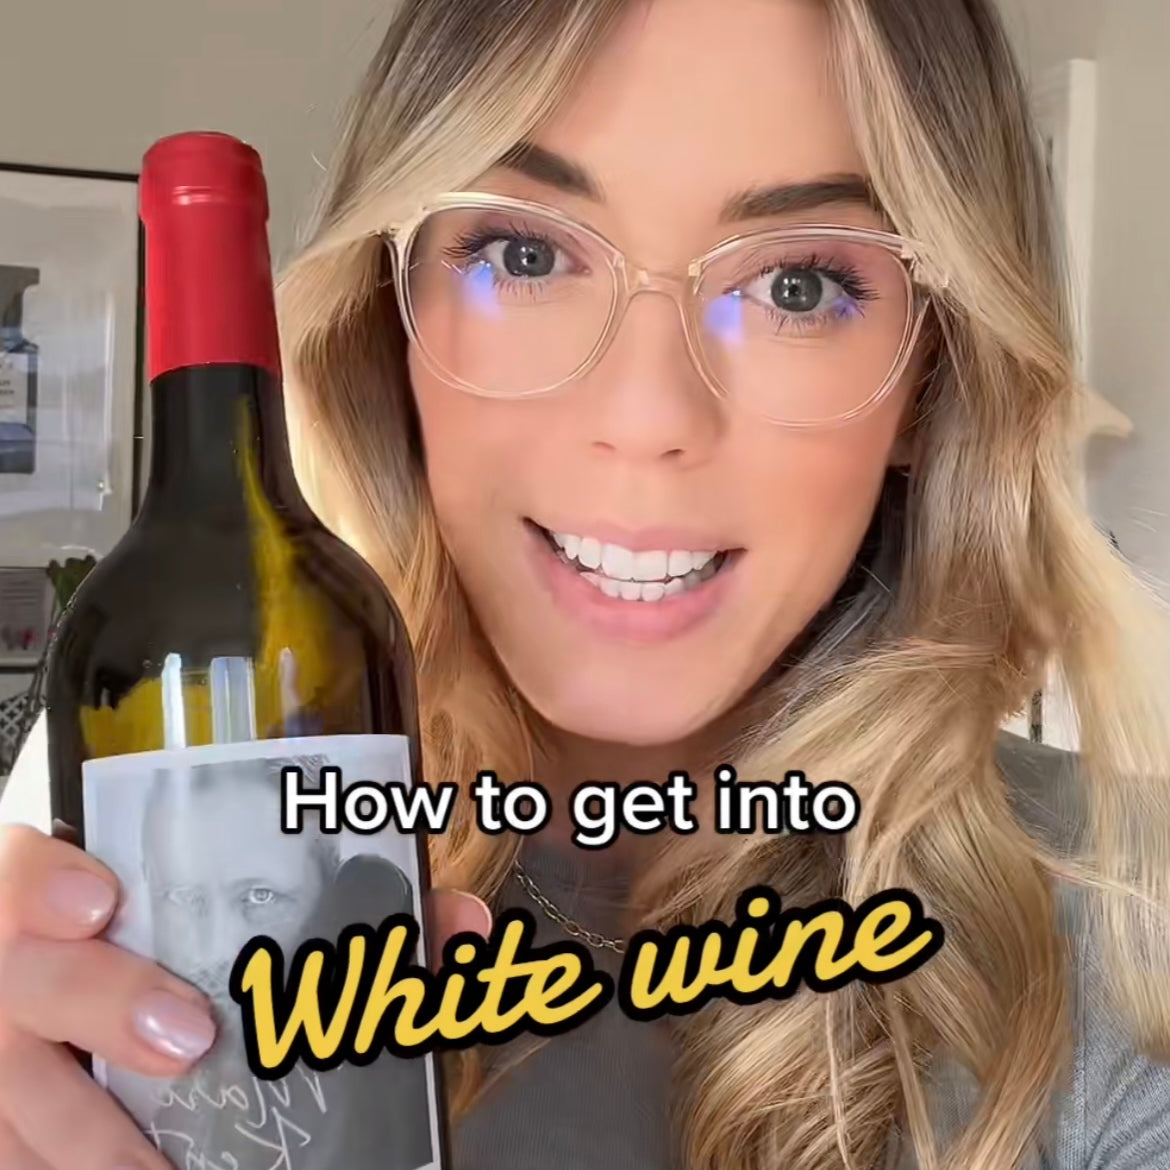 How to get into white wine if you think you don't like it